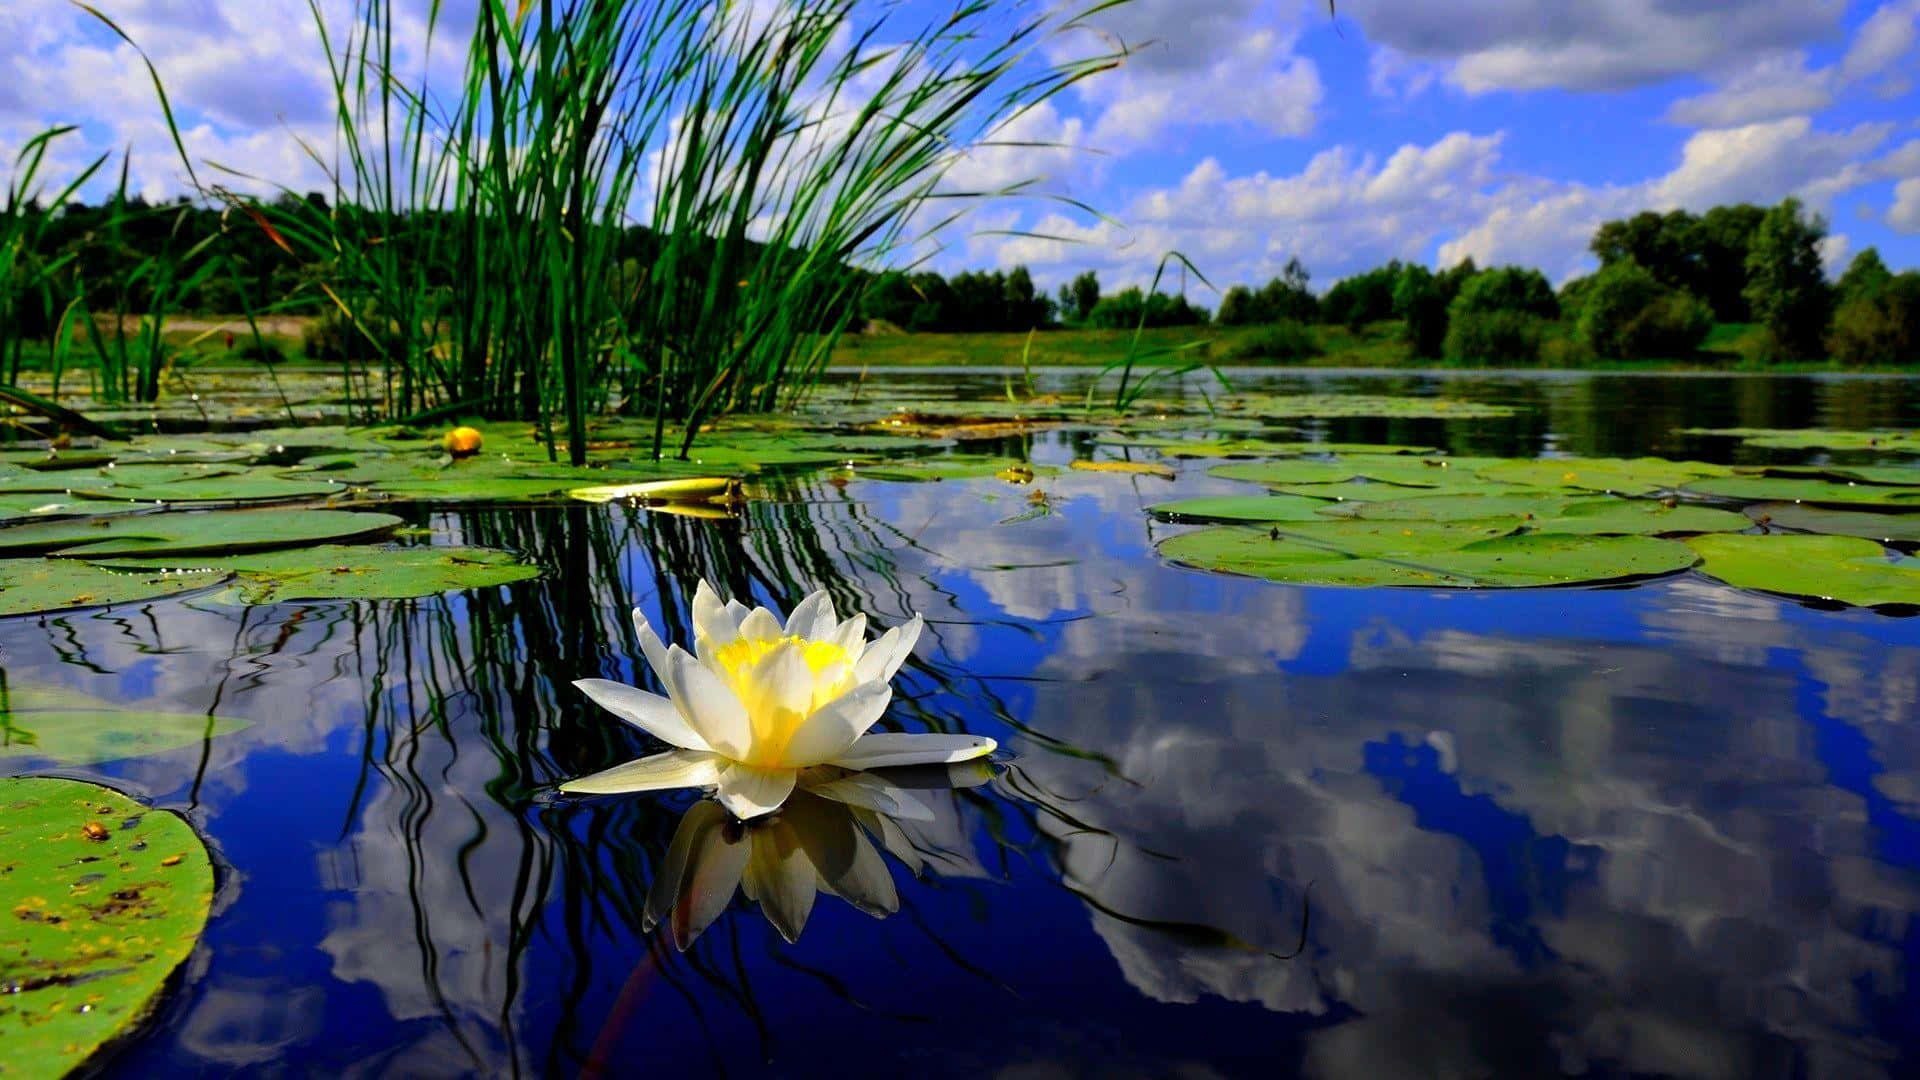 Enjoy the peaceful beauty of a tranquil pond in nature.